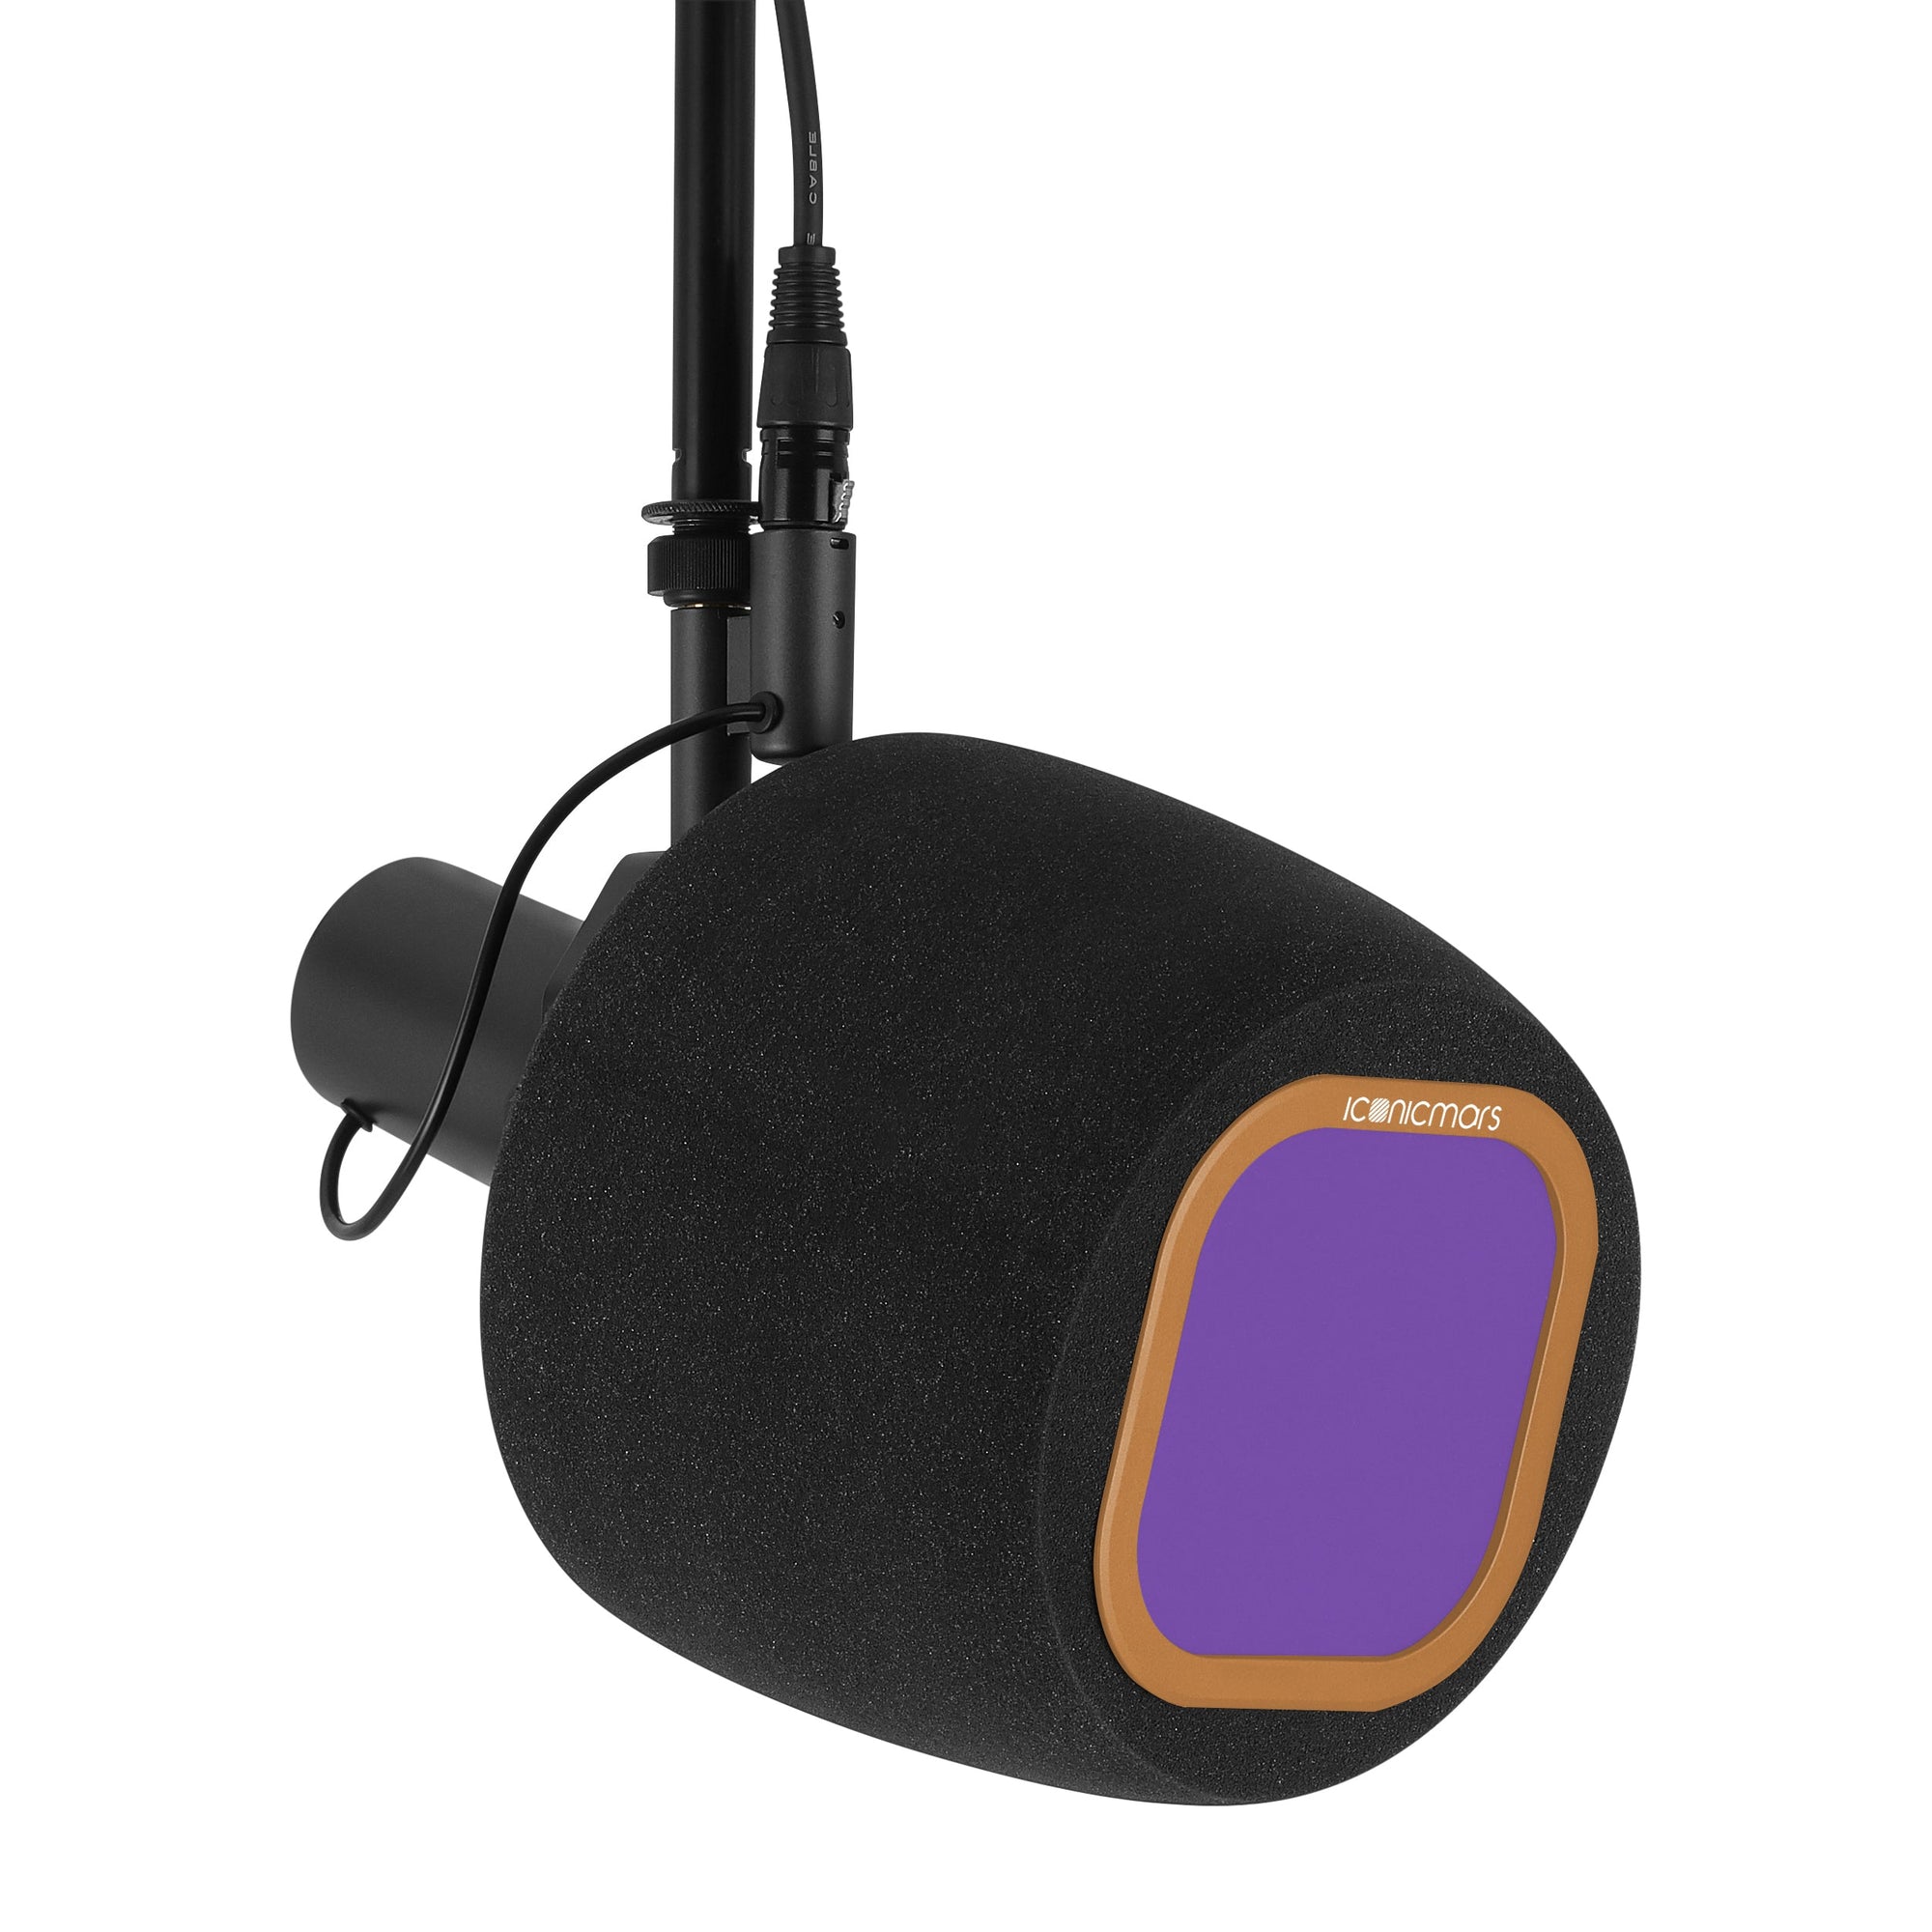 Comet X7B with pop filter on mic stand, vocal booth made for streaming, asmr, pro and home studio recording  -- PB&J